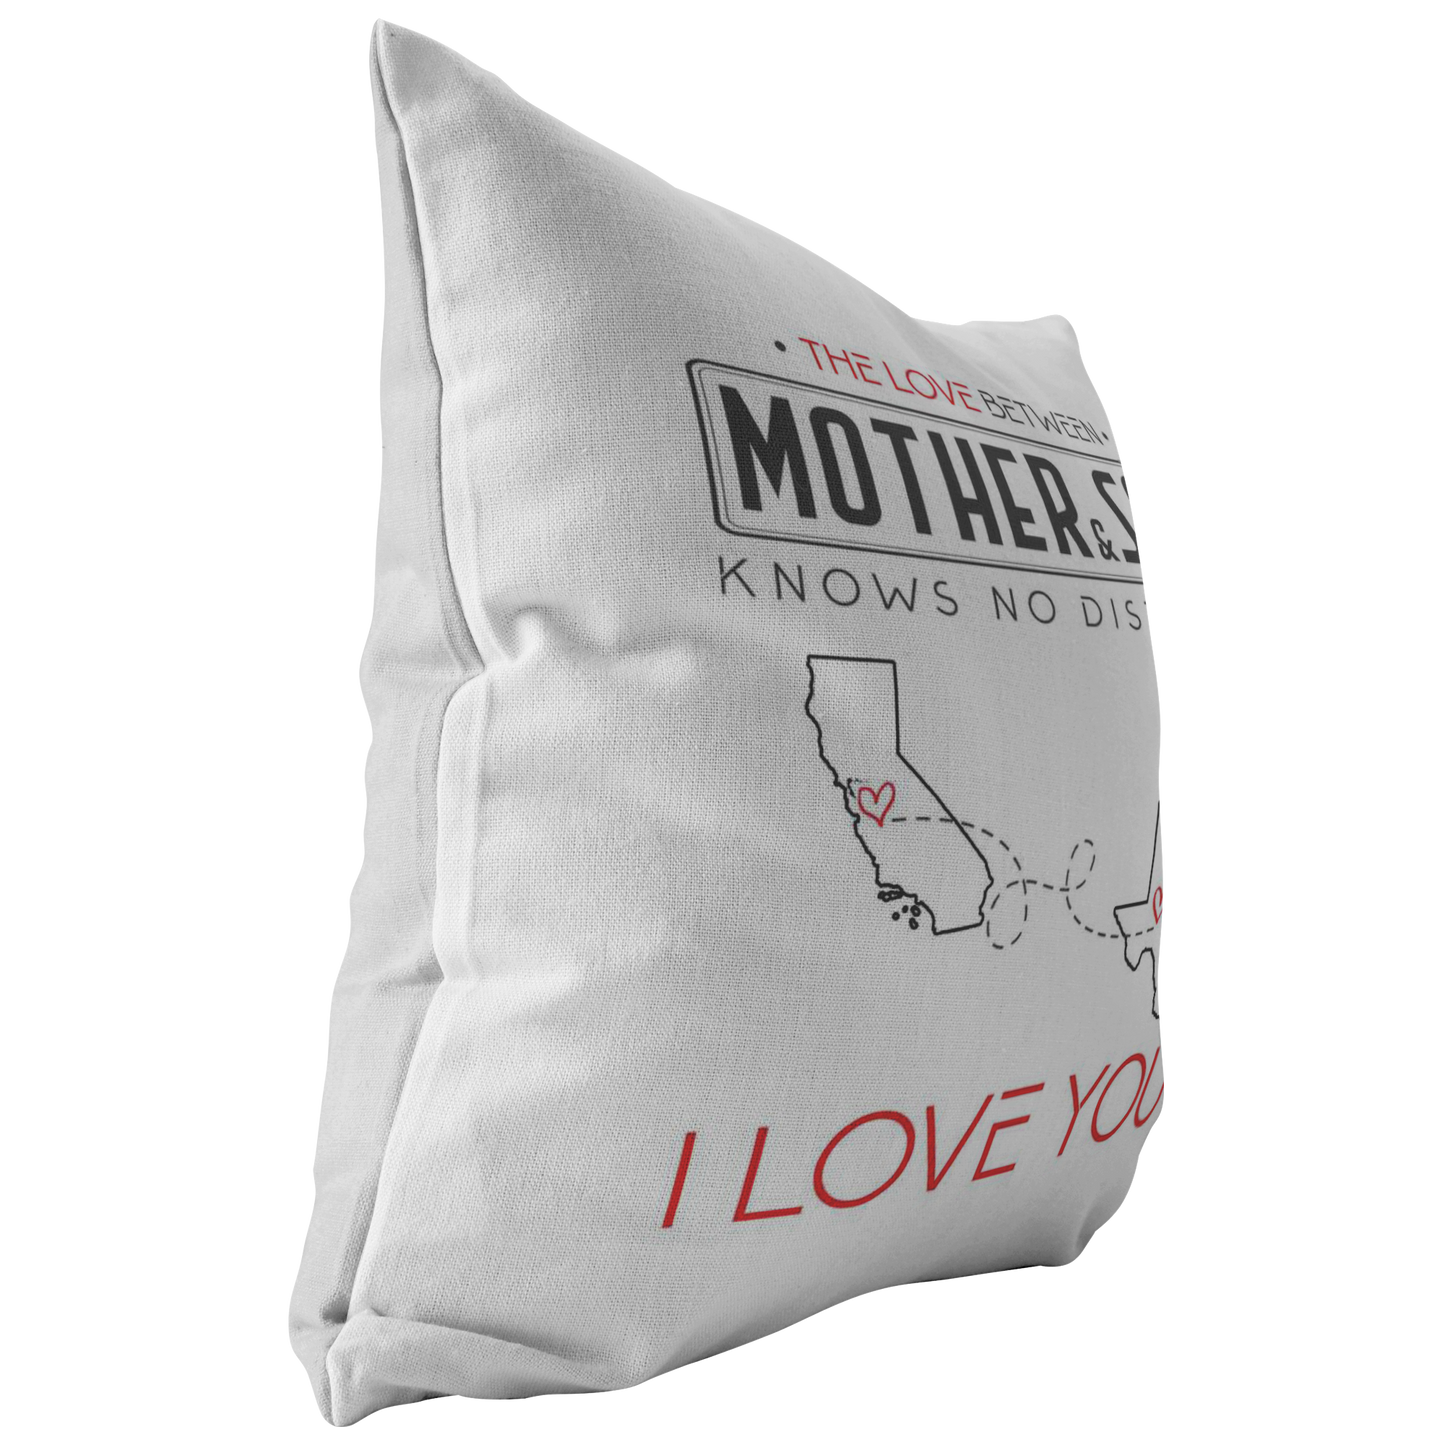 ND-pl20419401-sp-26367 - [ California | Texas | 1 ] (PI_ThrowPillowCovers) Mothers Day Gifts From Son - The Love Between Mother  Son